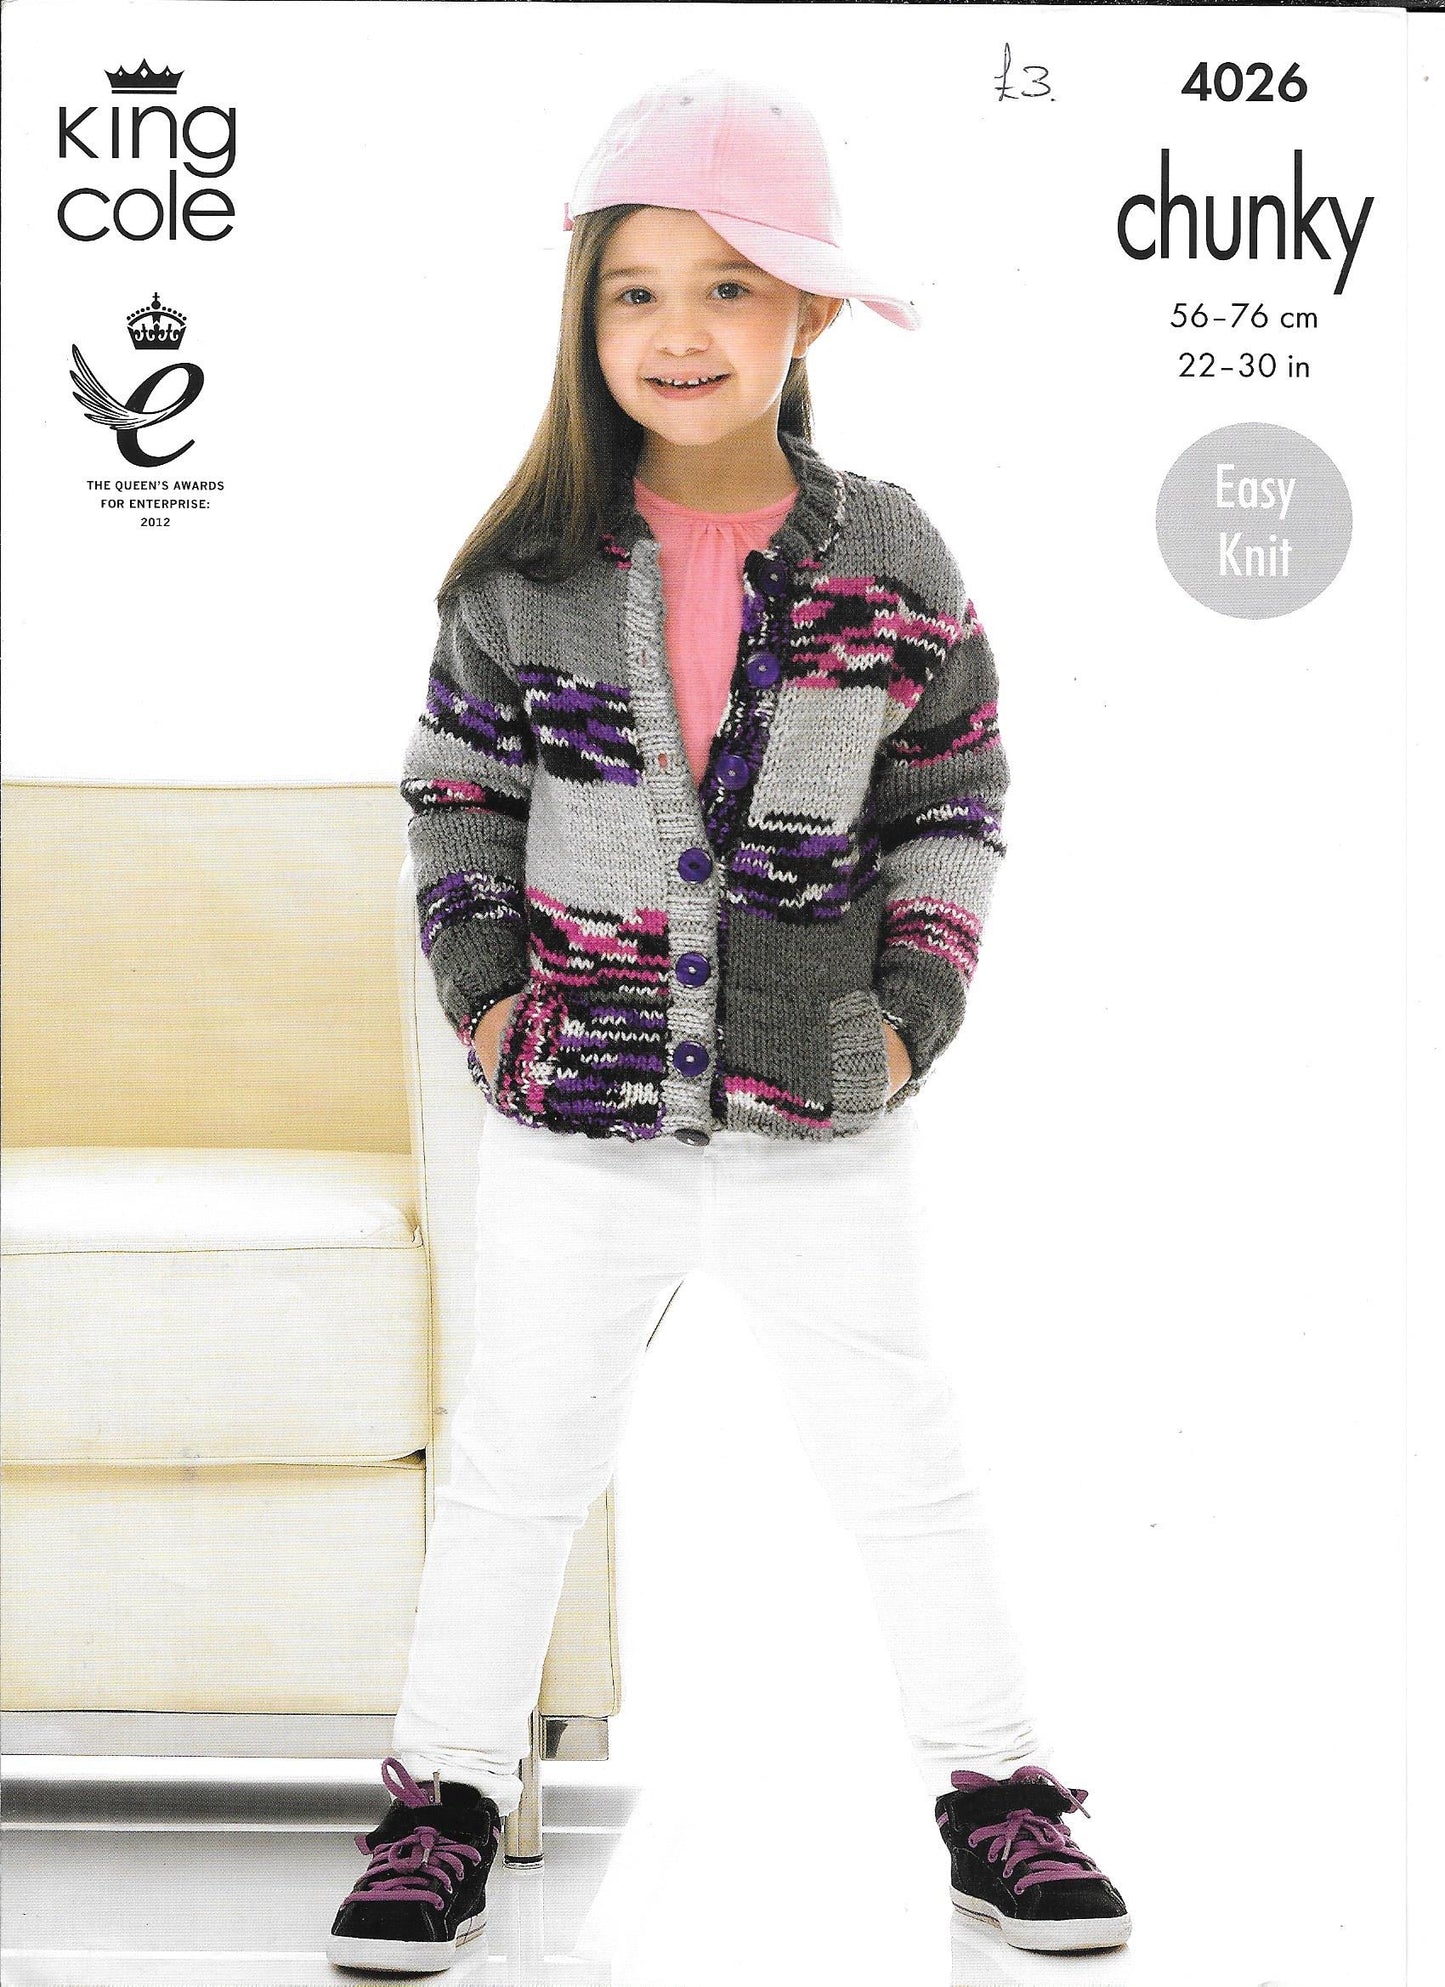 4026 King Cole Big Value Chunky child cardigan and hoodie knitting pattern